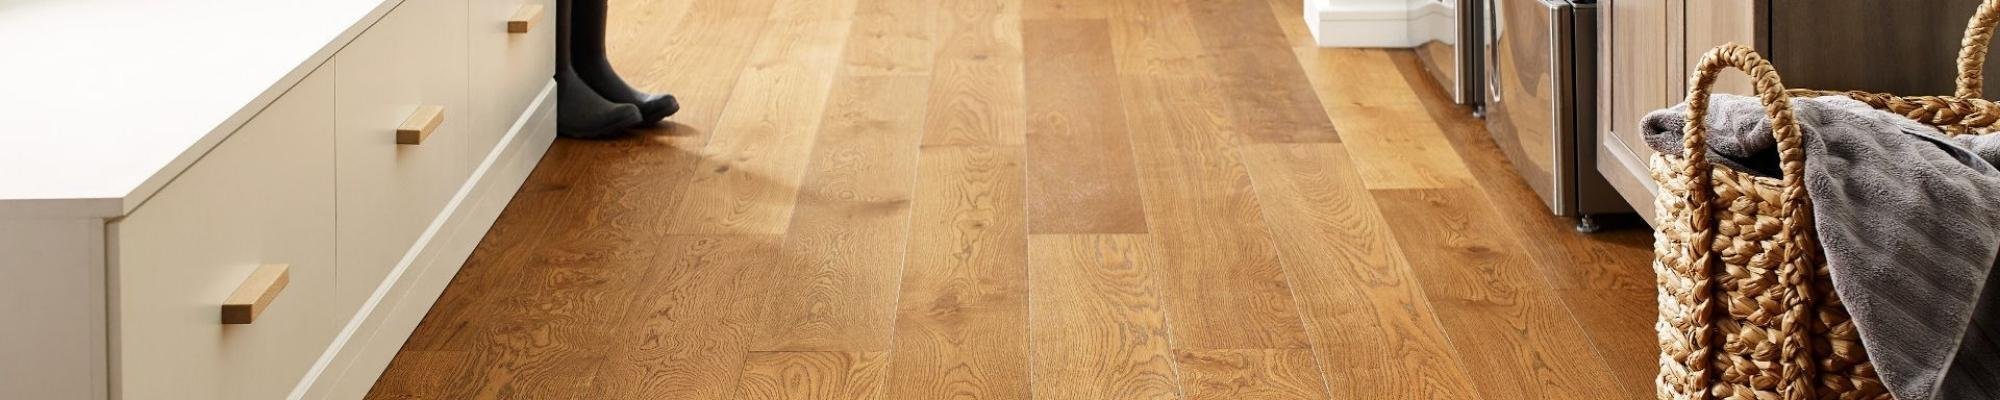 Hardwood Flooring from the Floor Store and Design in Columbia